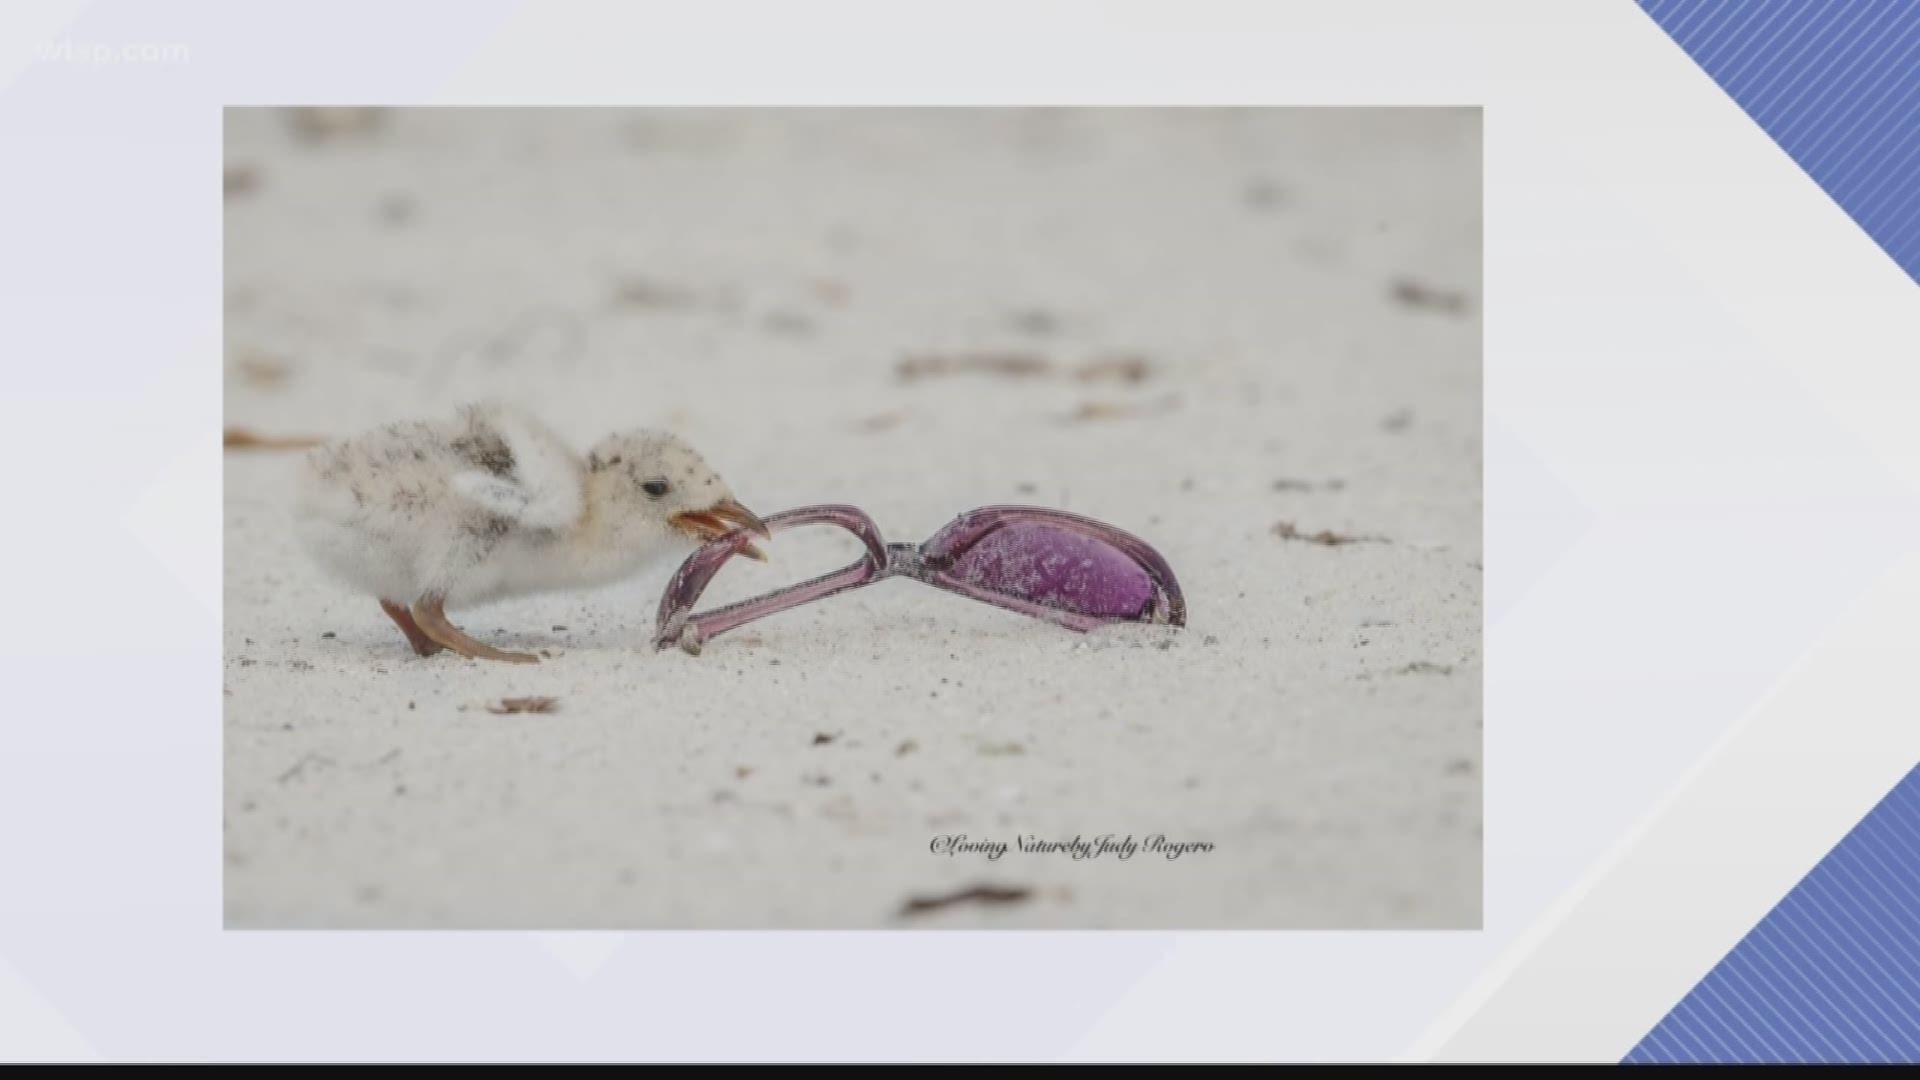 Heartbreaking photos from a nature photographer illustrate why it's so important to keep the beaches clean.

Judy Rogero captured devastating images of birds putting plastic in their beaks. Her photographs showed baby skimmers chewing on plastic toys and sunglasses, as well as a pelican trying to swallow a fish that is covered in plastic netting or fishing line. https://on.wtsp.com/2NGMALj